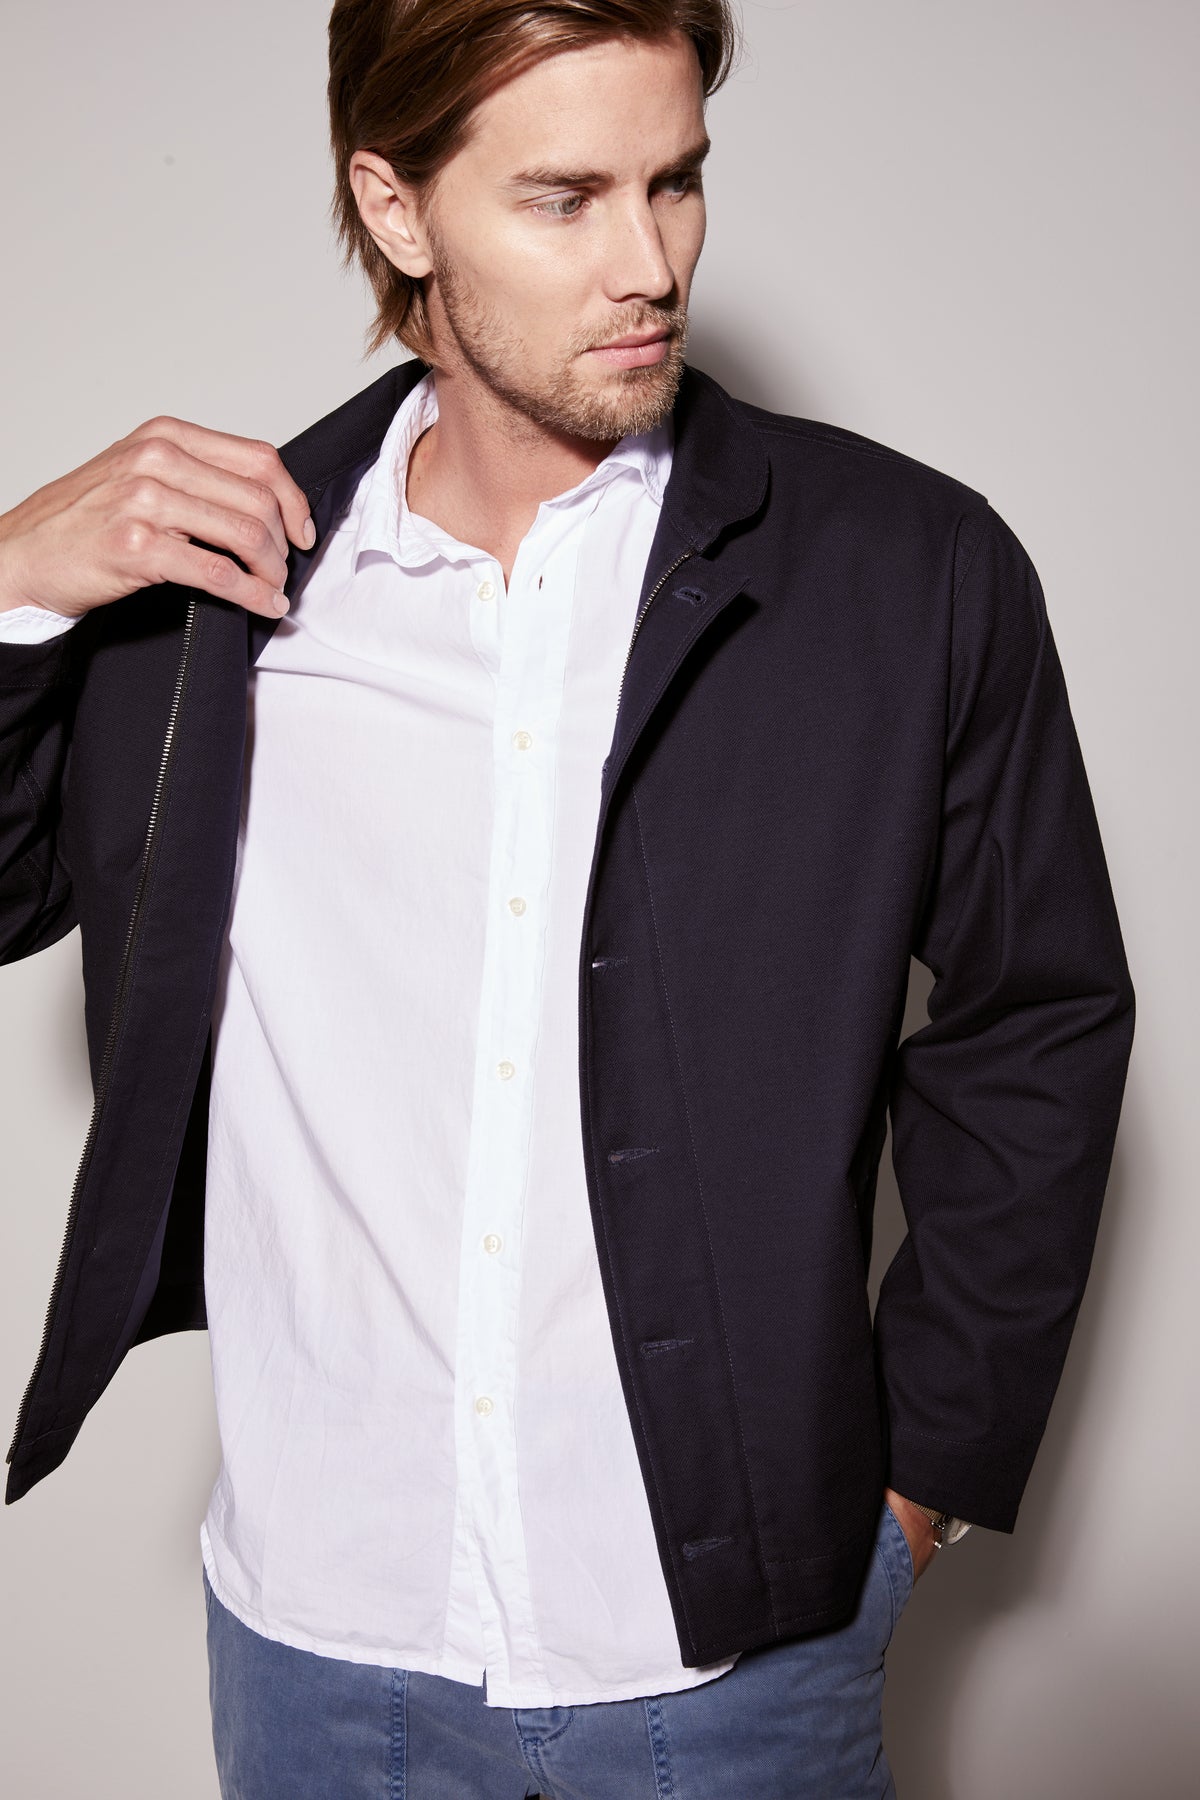 A man is posing in a Velvet by Graham & Spencer MARLON ZIP-UP JACKET and white shirt.-36009018261697